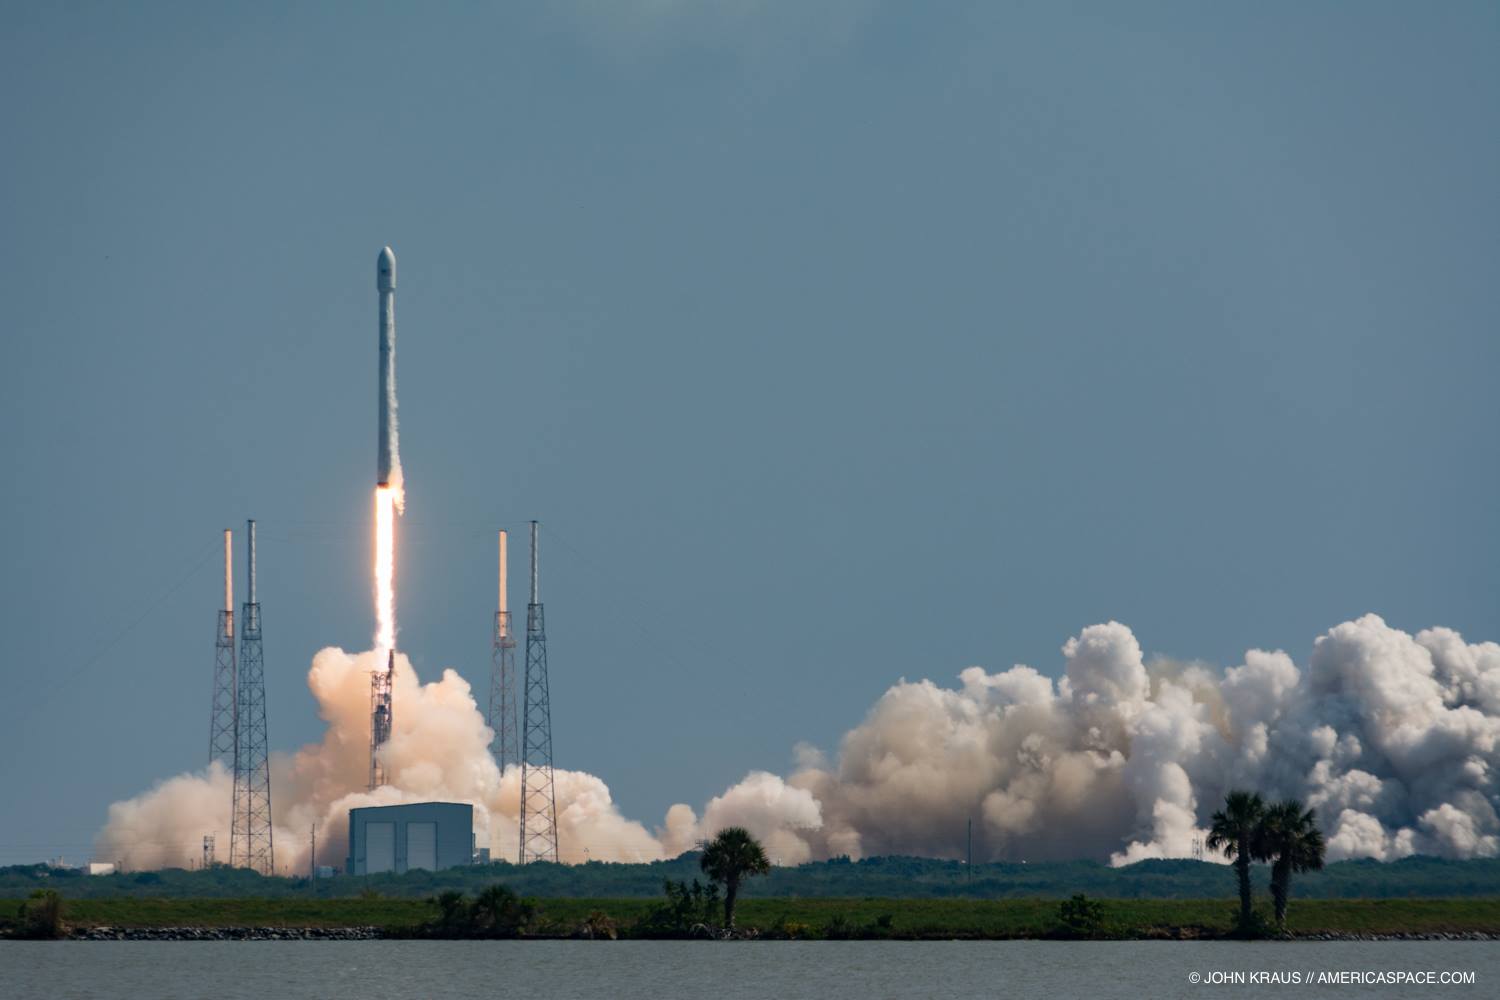 Today's launch marked the sixth flight of the Upgraded Falcon 9 in less than six months. Photo Credit: John Kraus/AmericaSpace